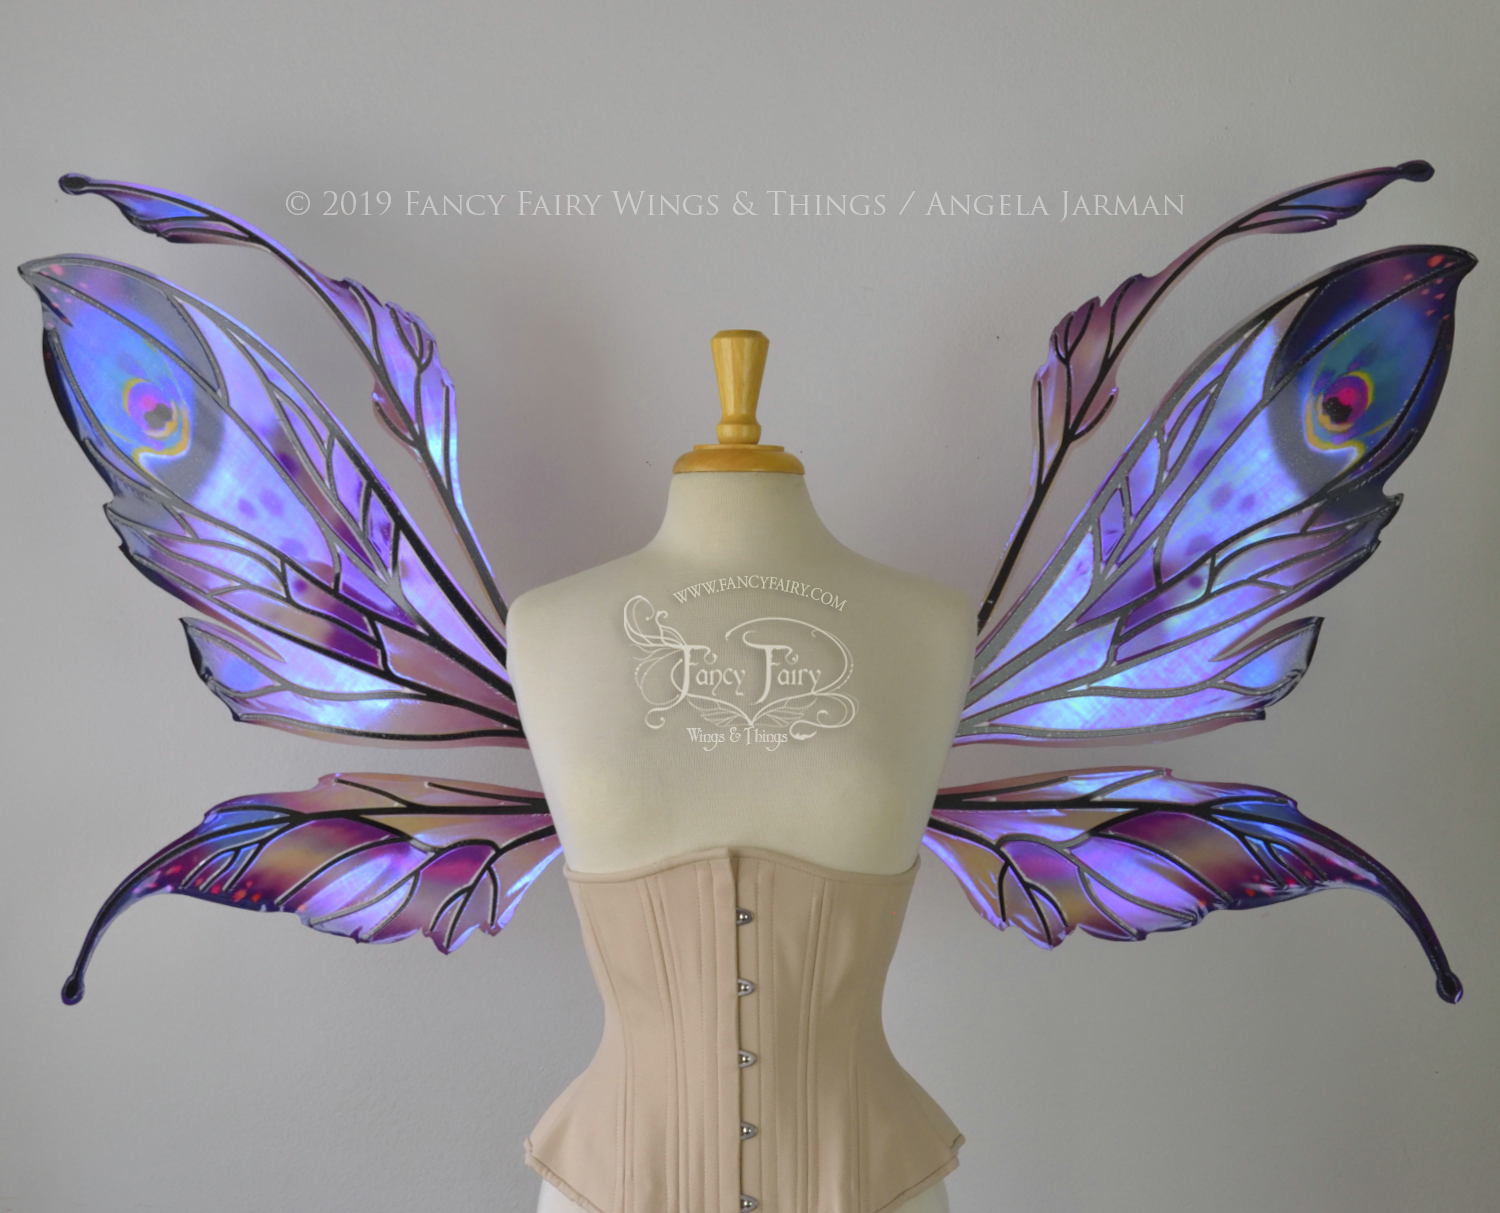 Front view of a dress form wearing an underbust corset & extra large iridescent fairy wings with mauve purple & blue color pattern